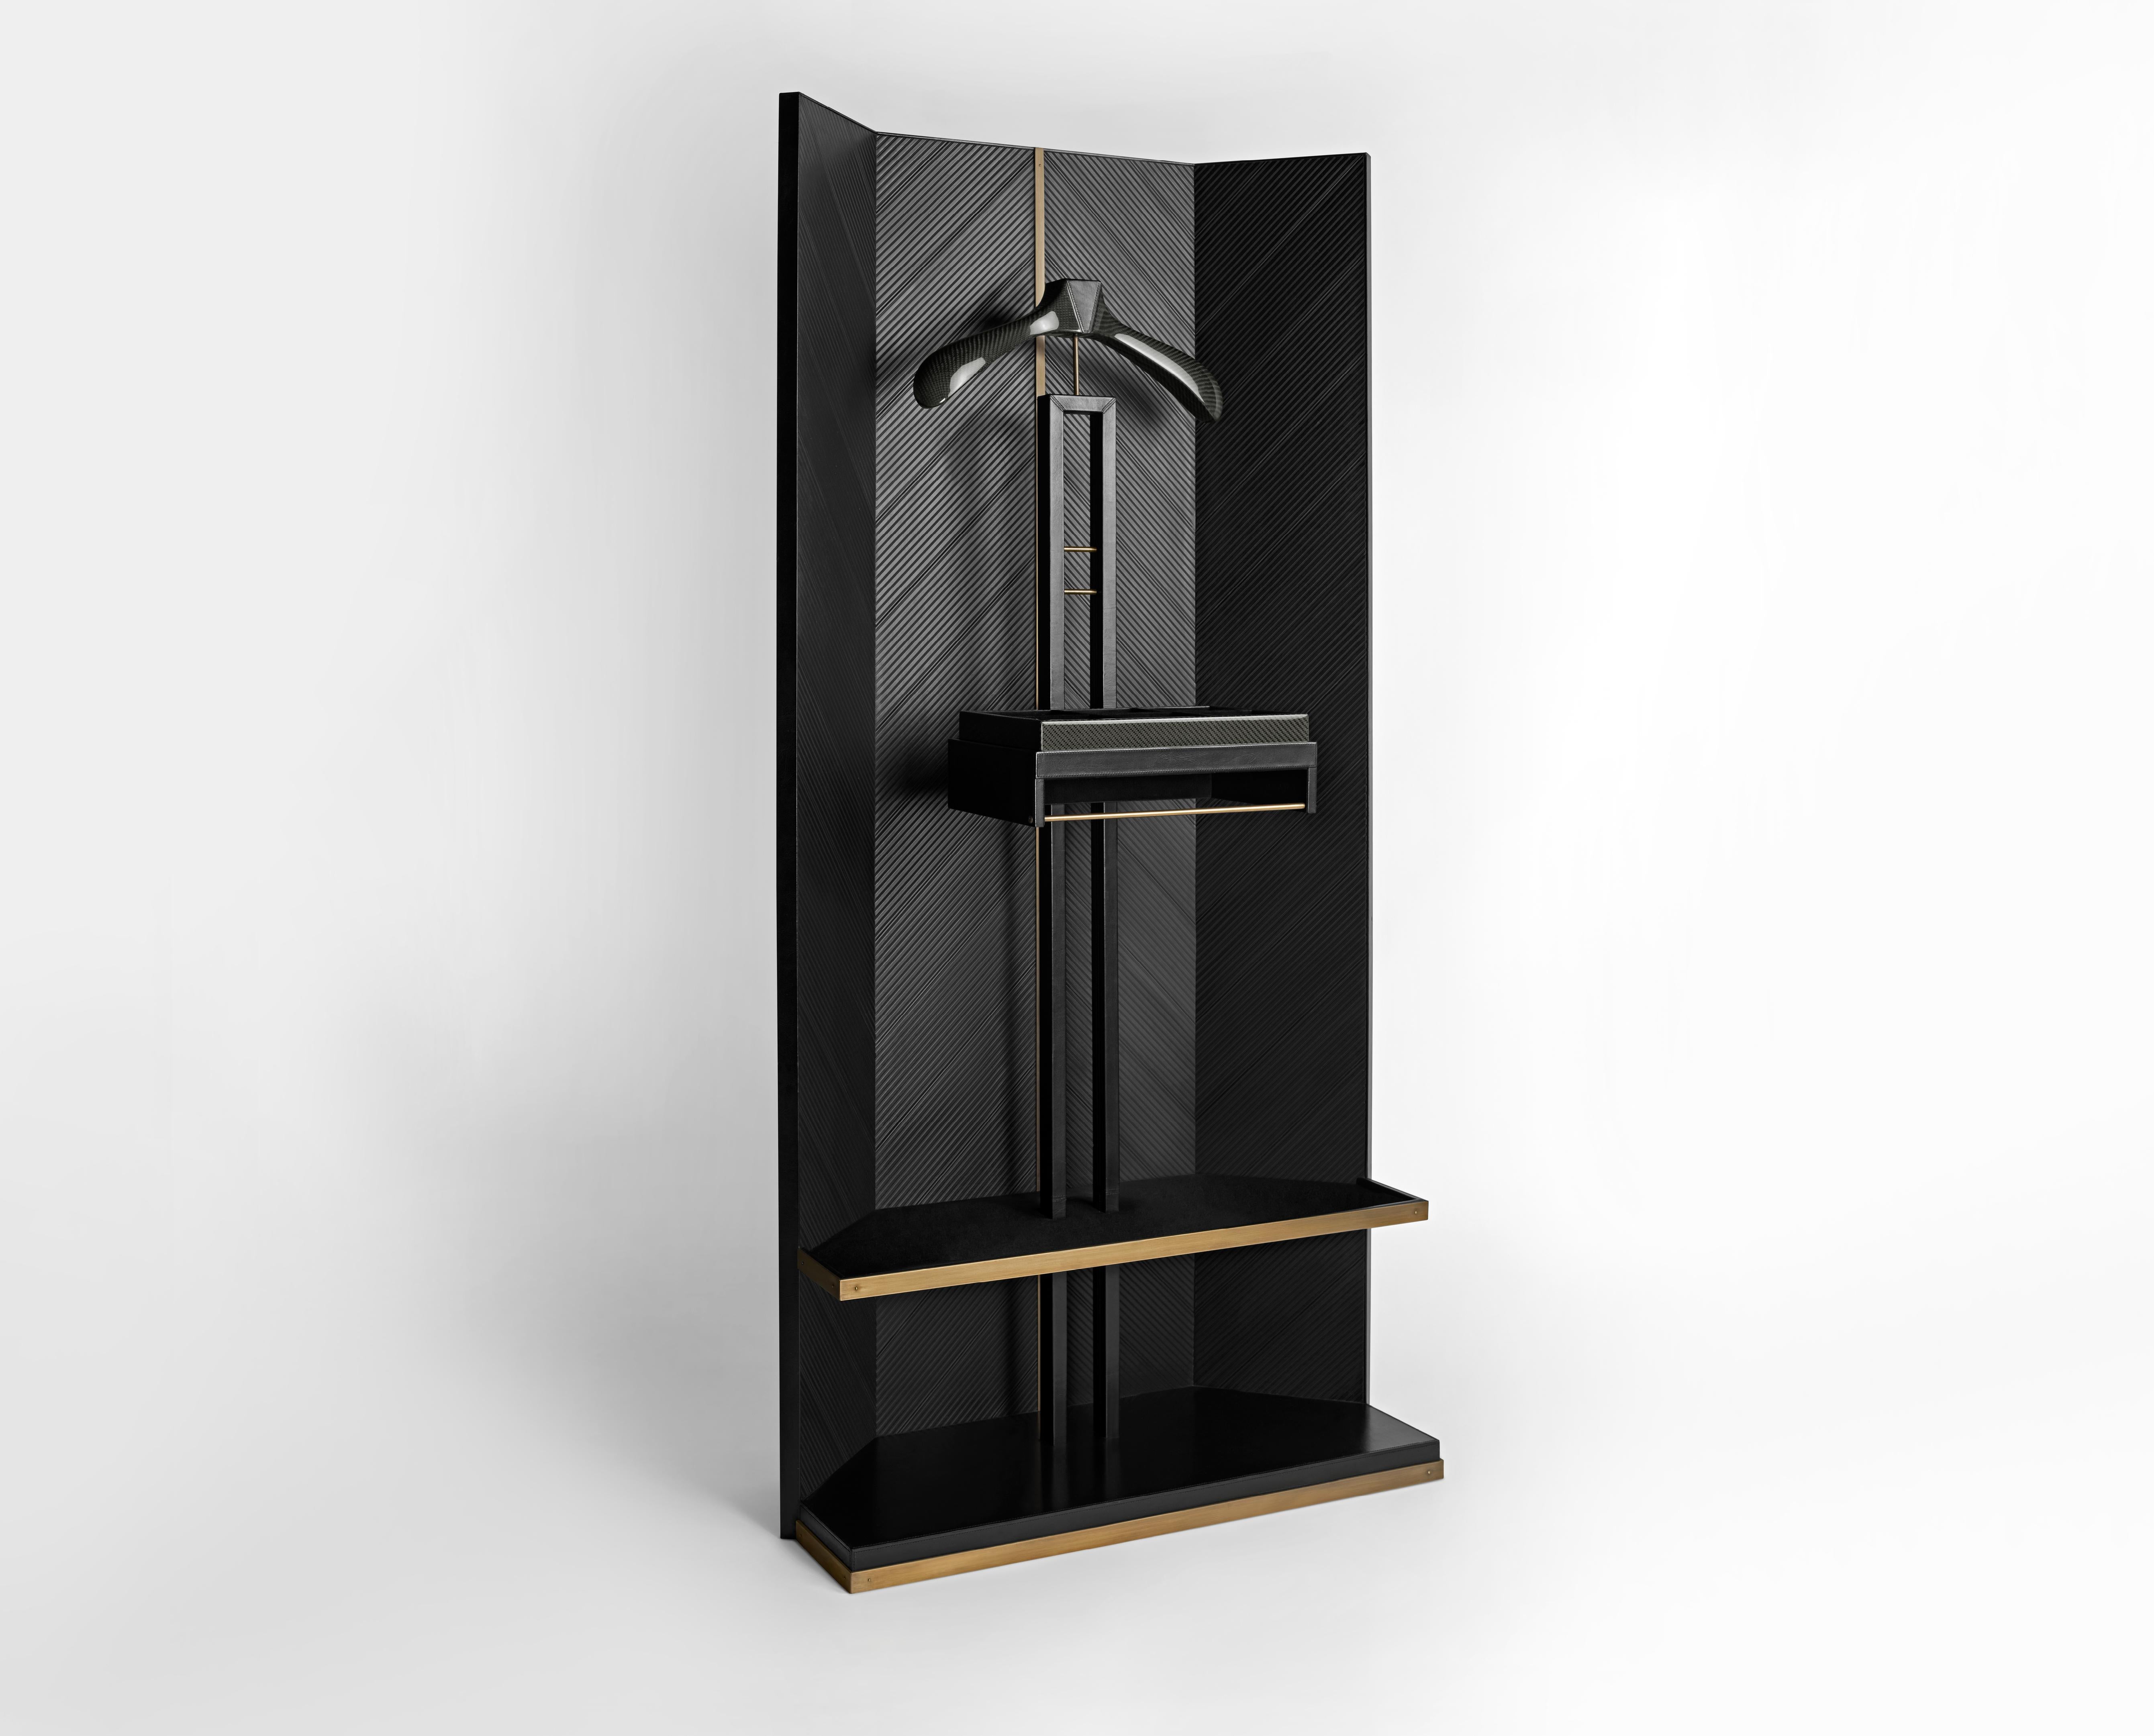 Carbon Fiber Rialto dressing valet by Madheke
Dimensions: W 89.8 x D 43.7 x H 183.2 cm
Materials: Carbon fibre, leather, fabric, metal 

The elegant freestanding valet is a vintage revival reimagined into a contemporary design to suit the modern